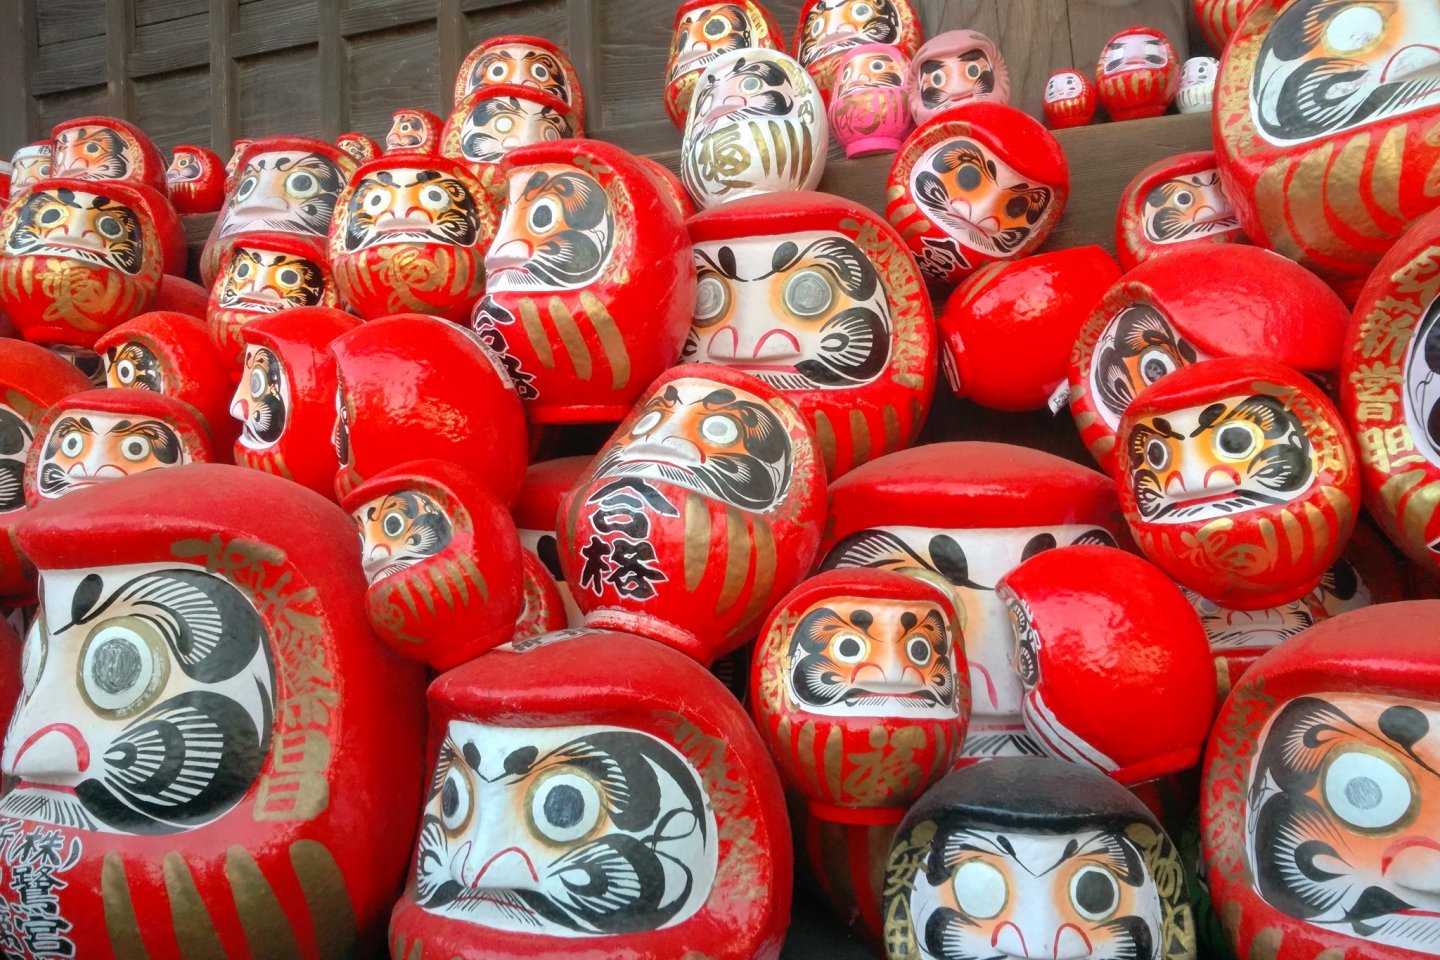 The Daruma dolls look alike. But they are all different and unique, especially when they contain special wishes from each worshipper